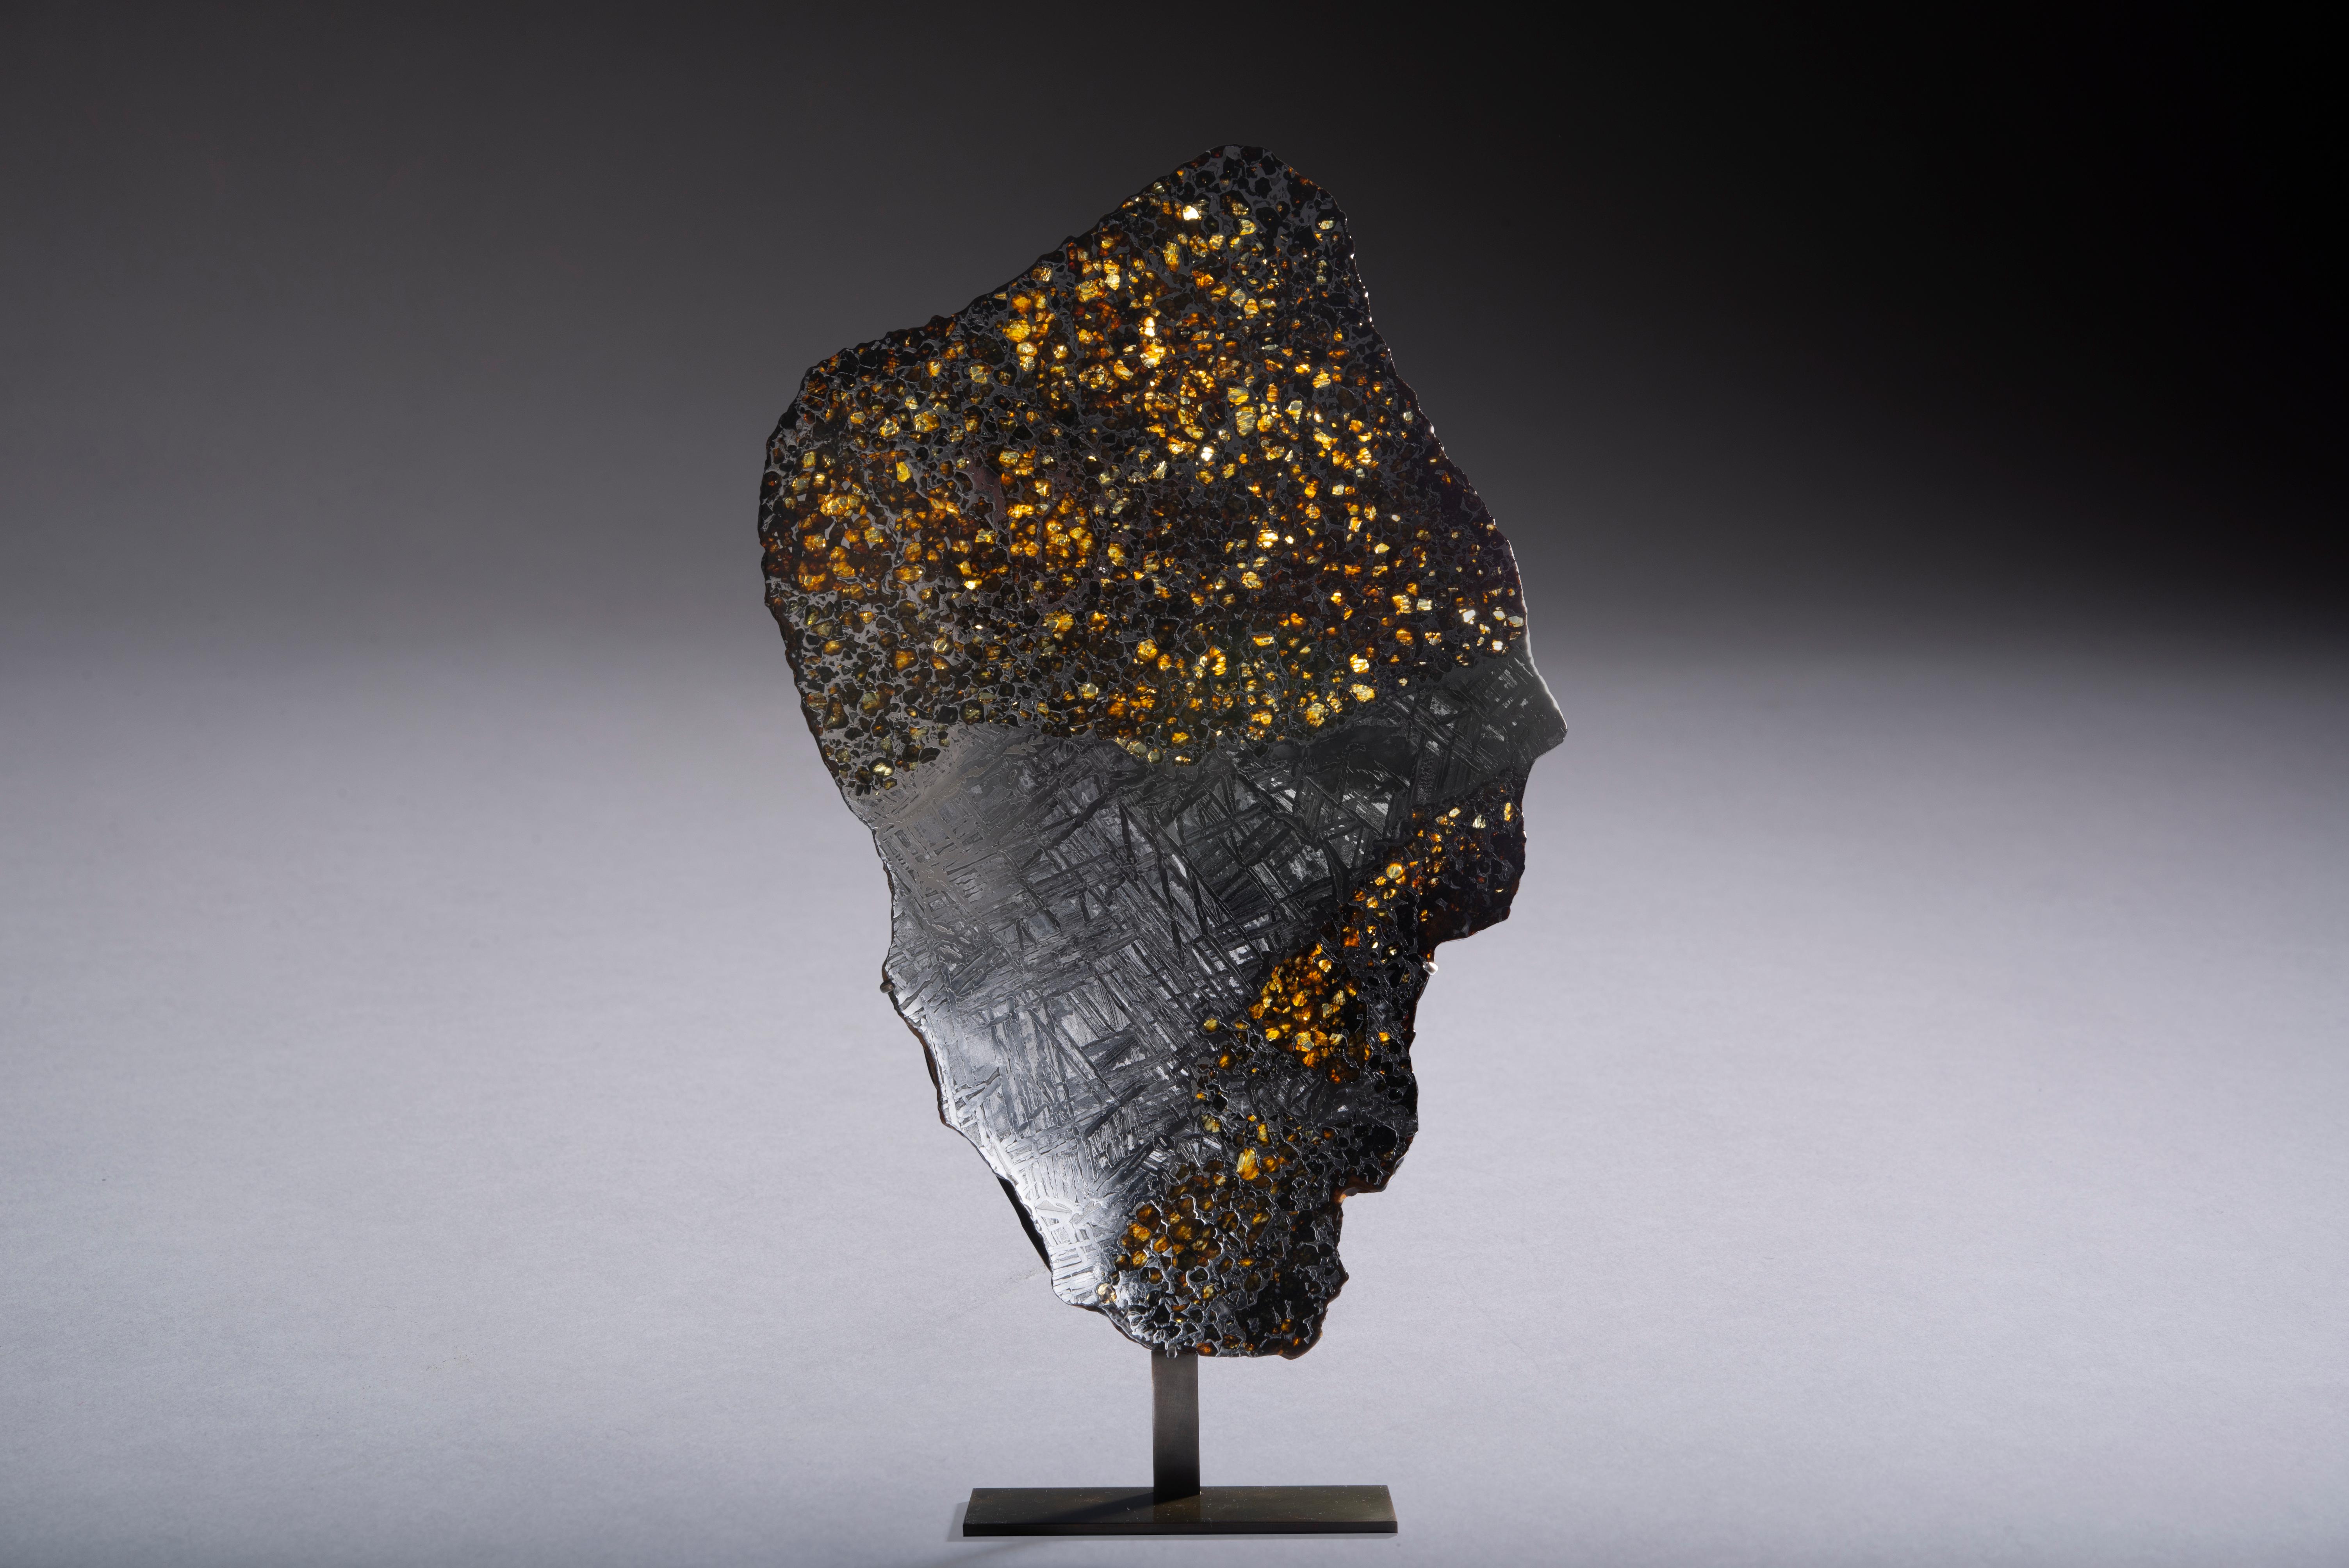 A magnificent cross-sectional cut from the pallasite meteorite Seymchan, recovered from the bed of the river Hekandue in the Russian Far East. It has been prepared to reveal the honeycomb-like structure characteristic of pallasites, with gems of